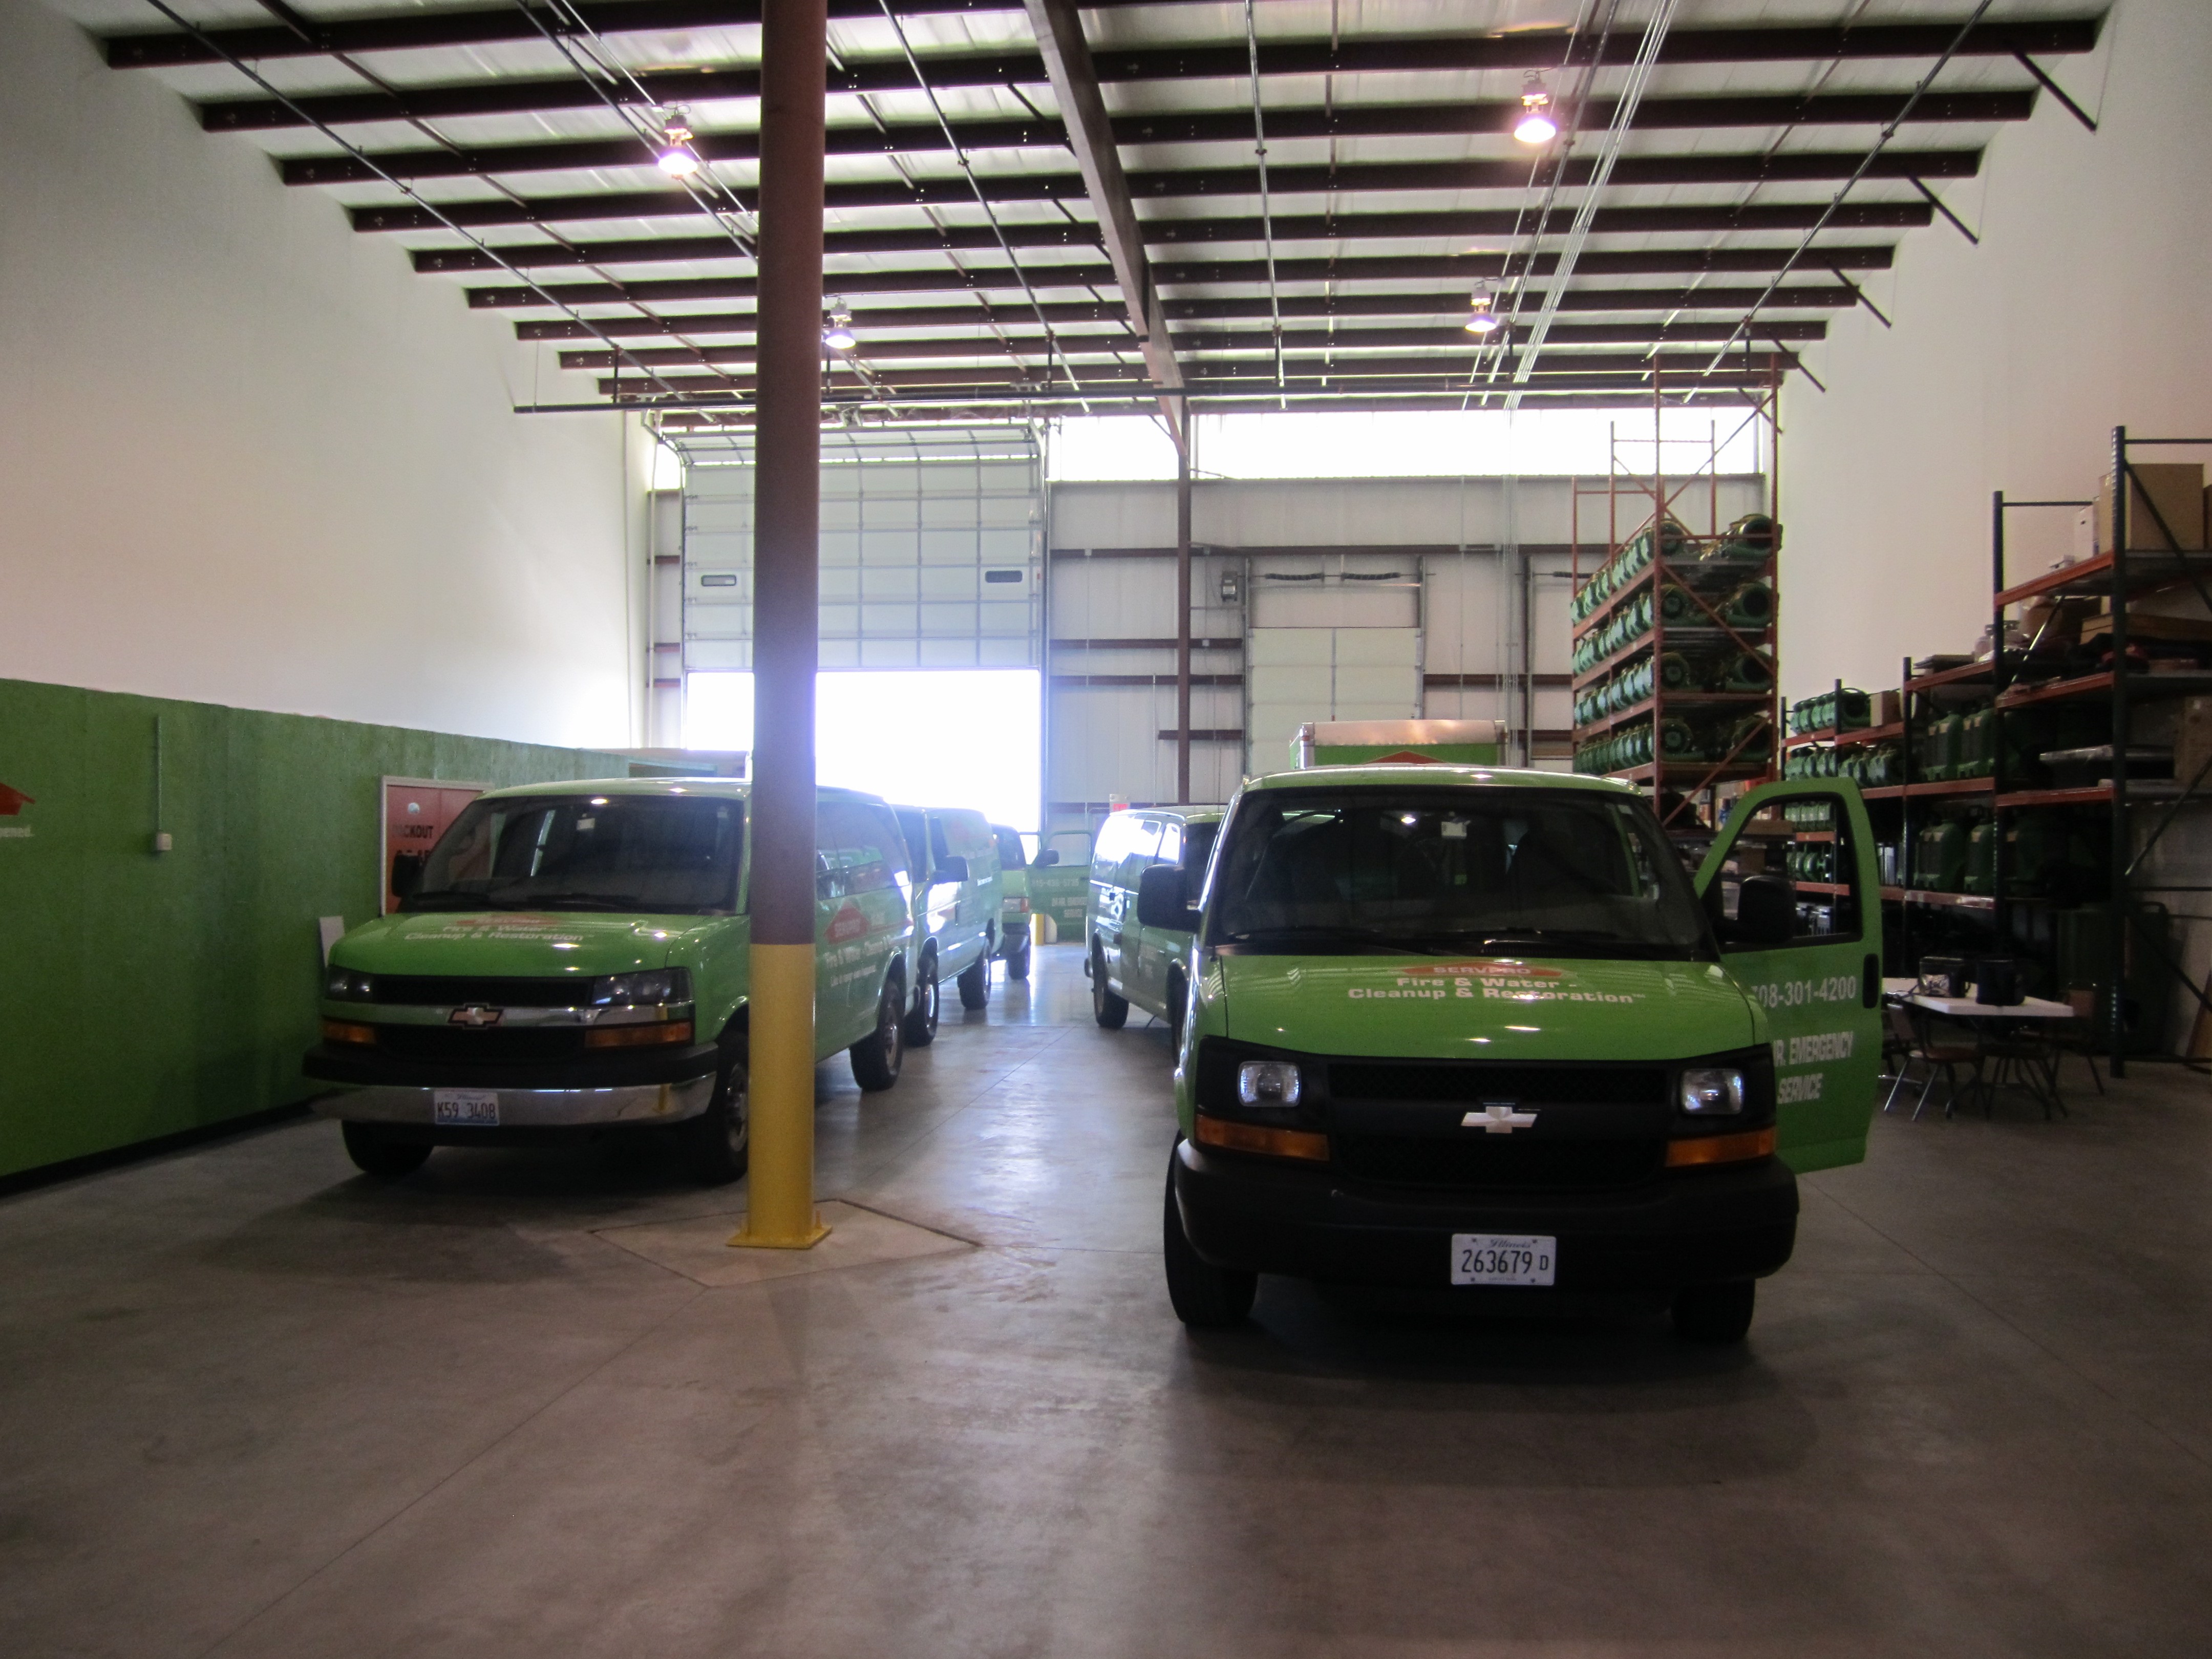 When disaster strikes, you can trust SERVPRO of Lockport/Lemont/Homer Glen to quickly respond and get to work.